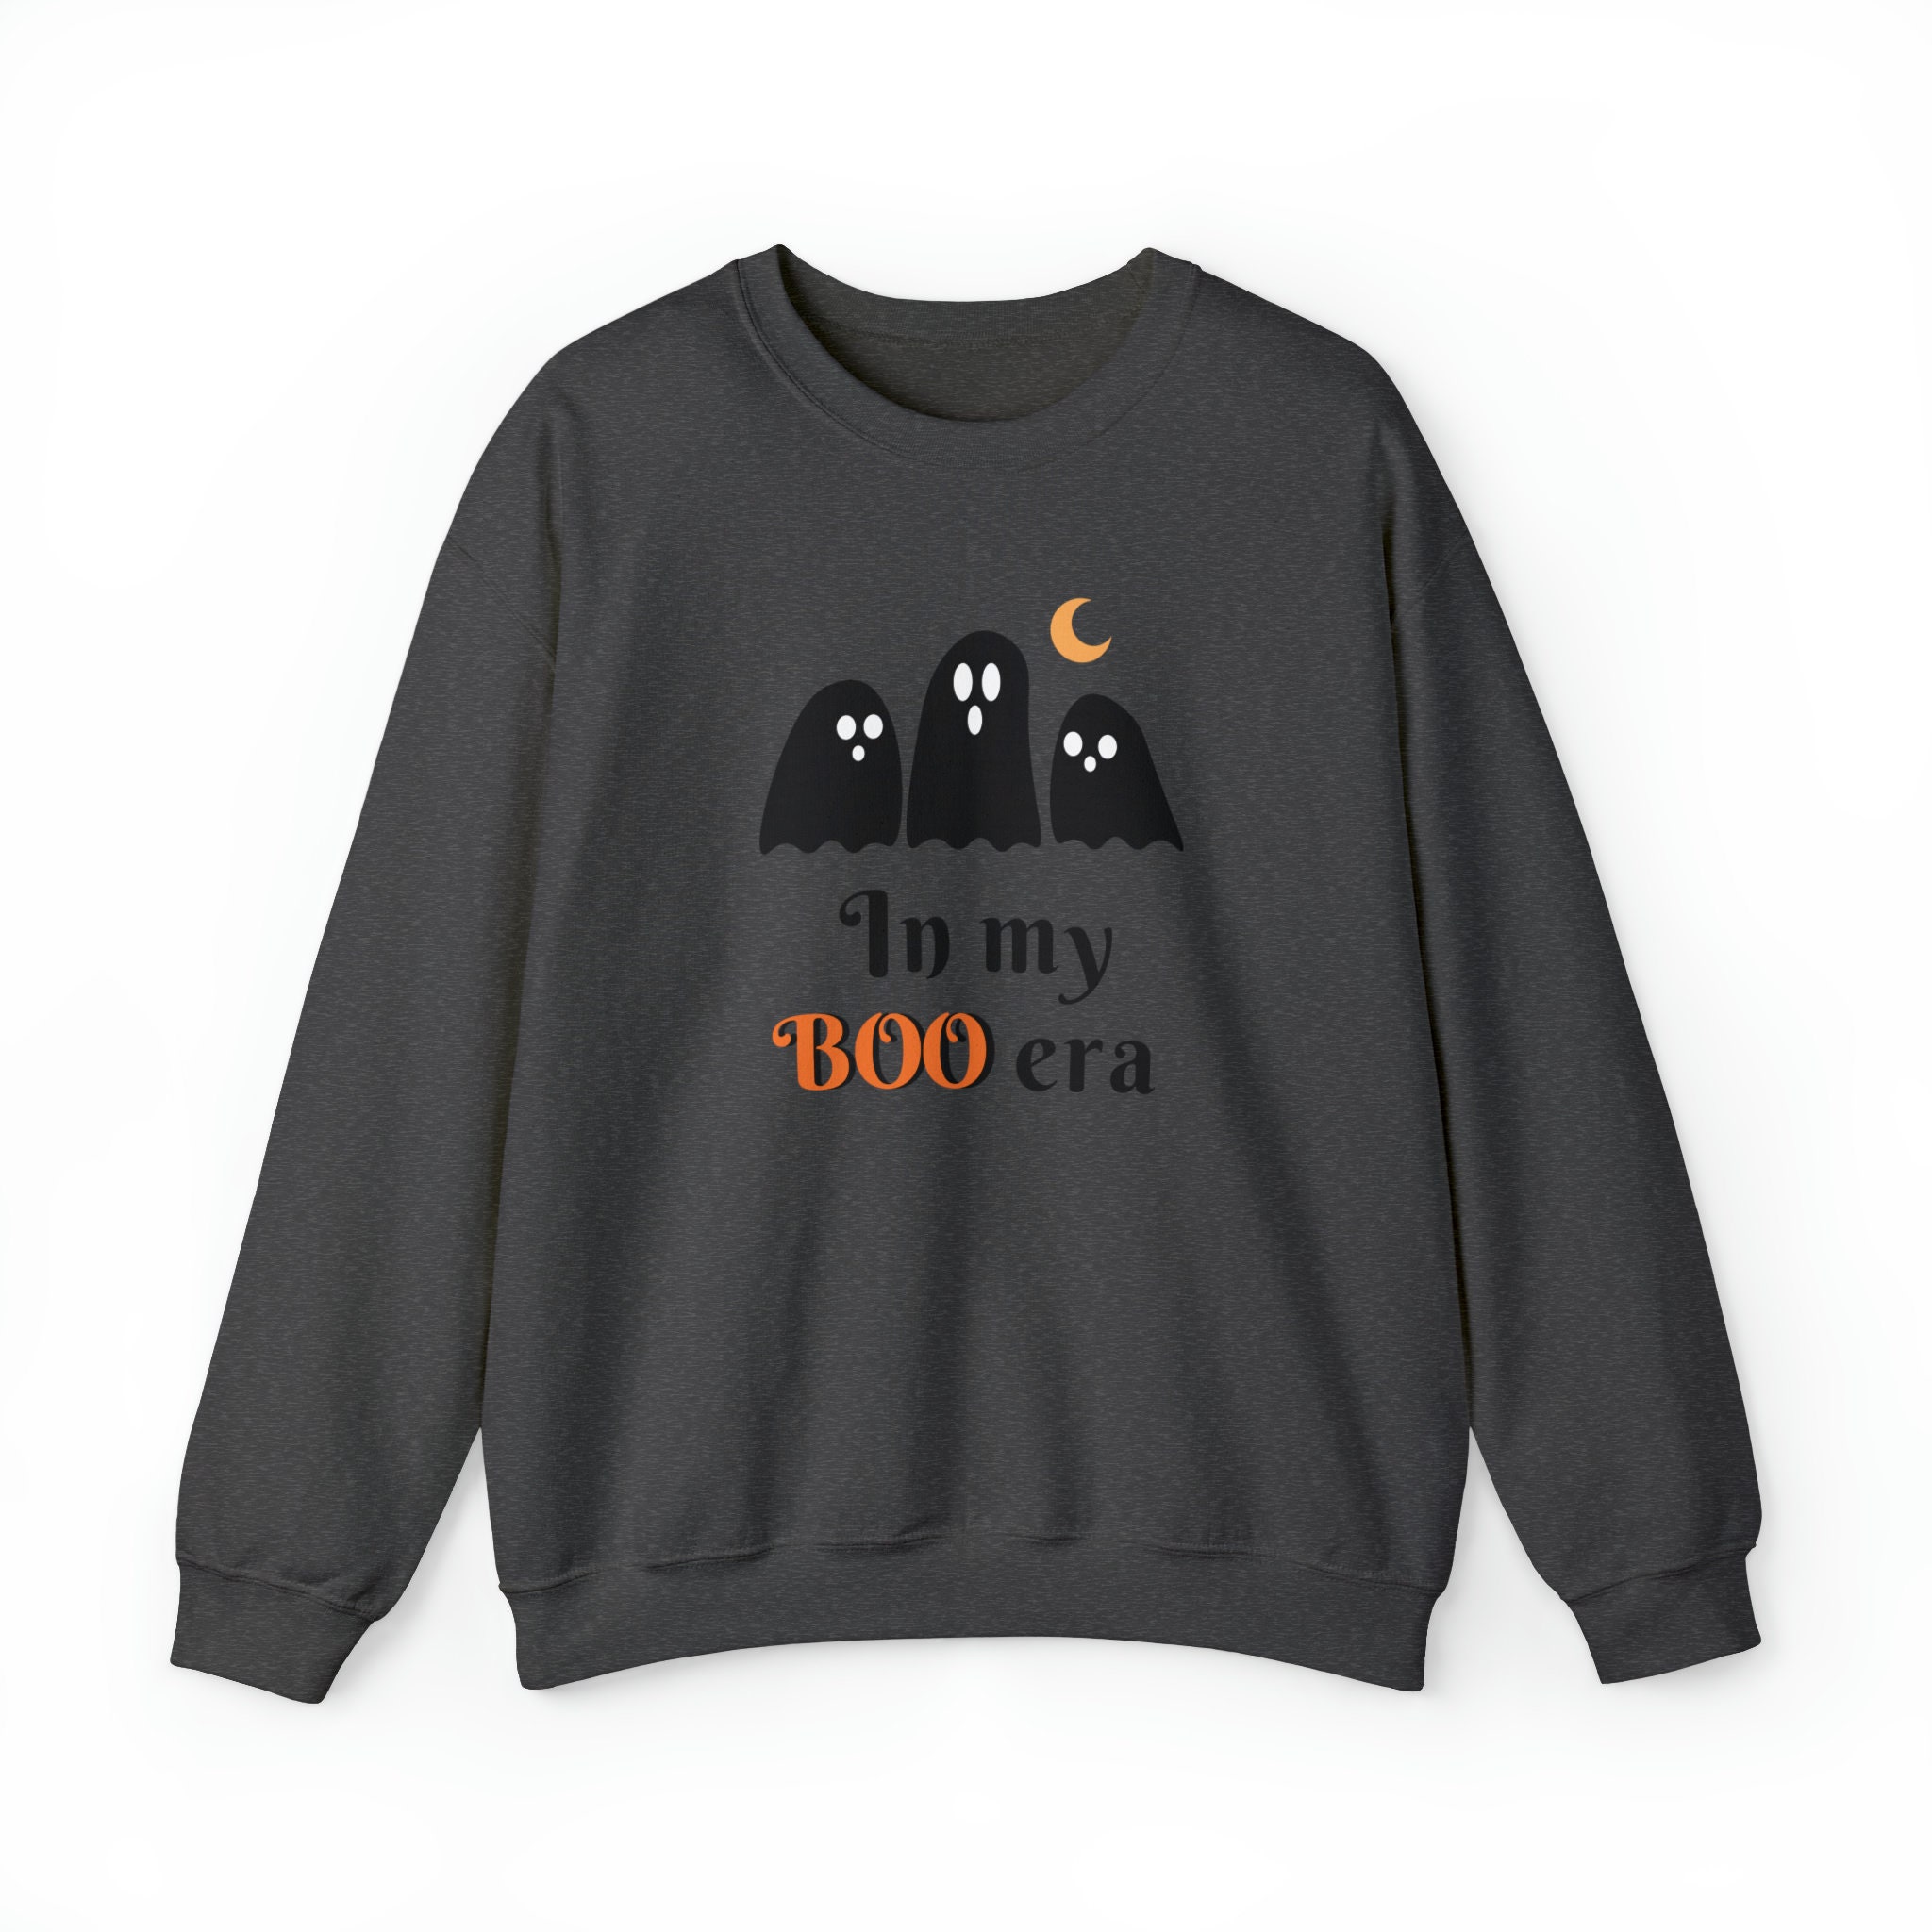 Discover Cute Black Ghost In My Boo Era Halloween Crewneck Sweatshirt, to get into the fall spirit - inclusive sizes - gray yellow pink blue white